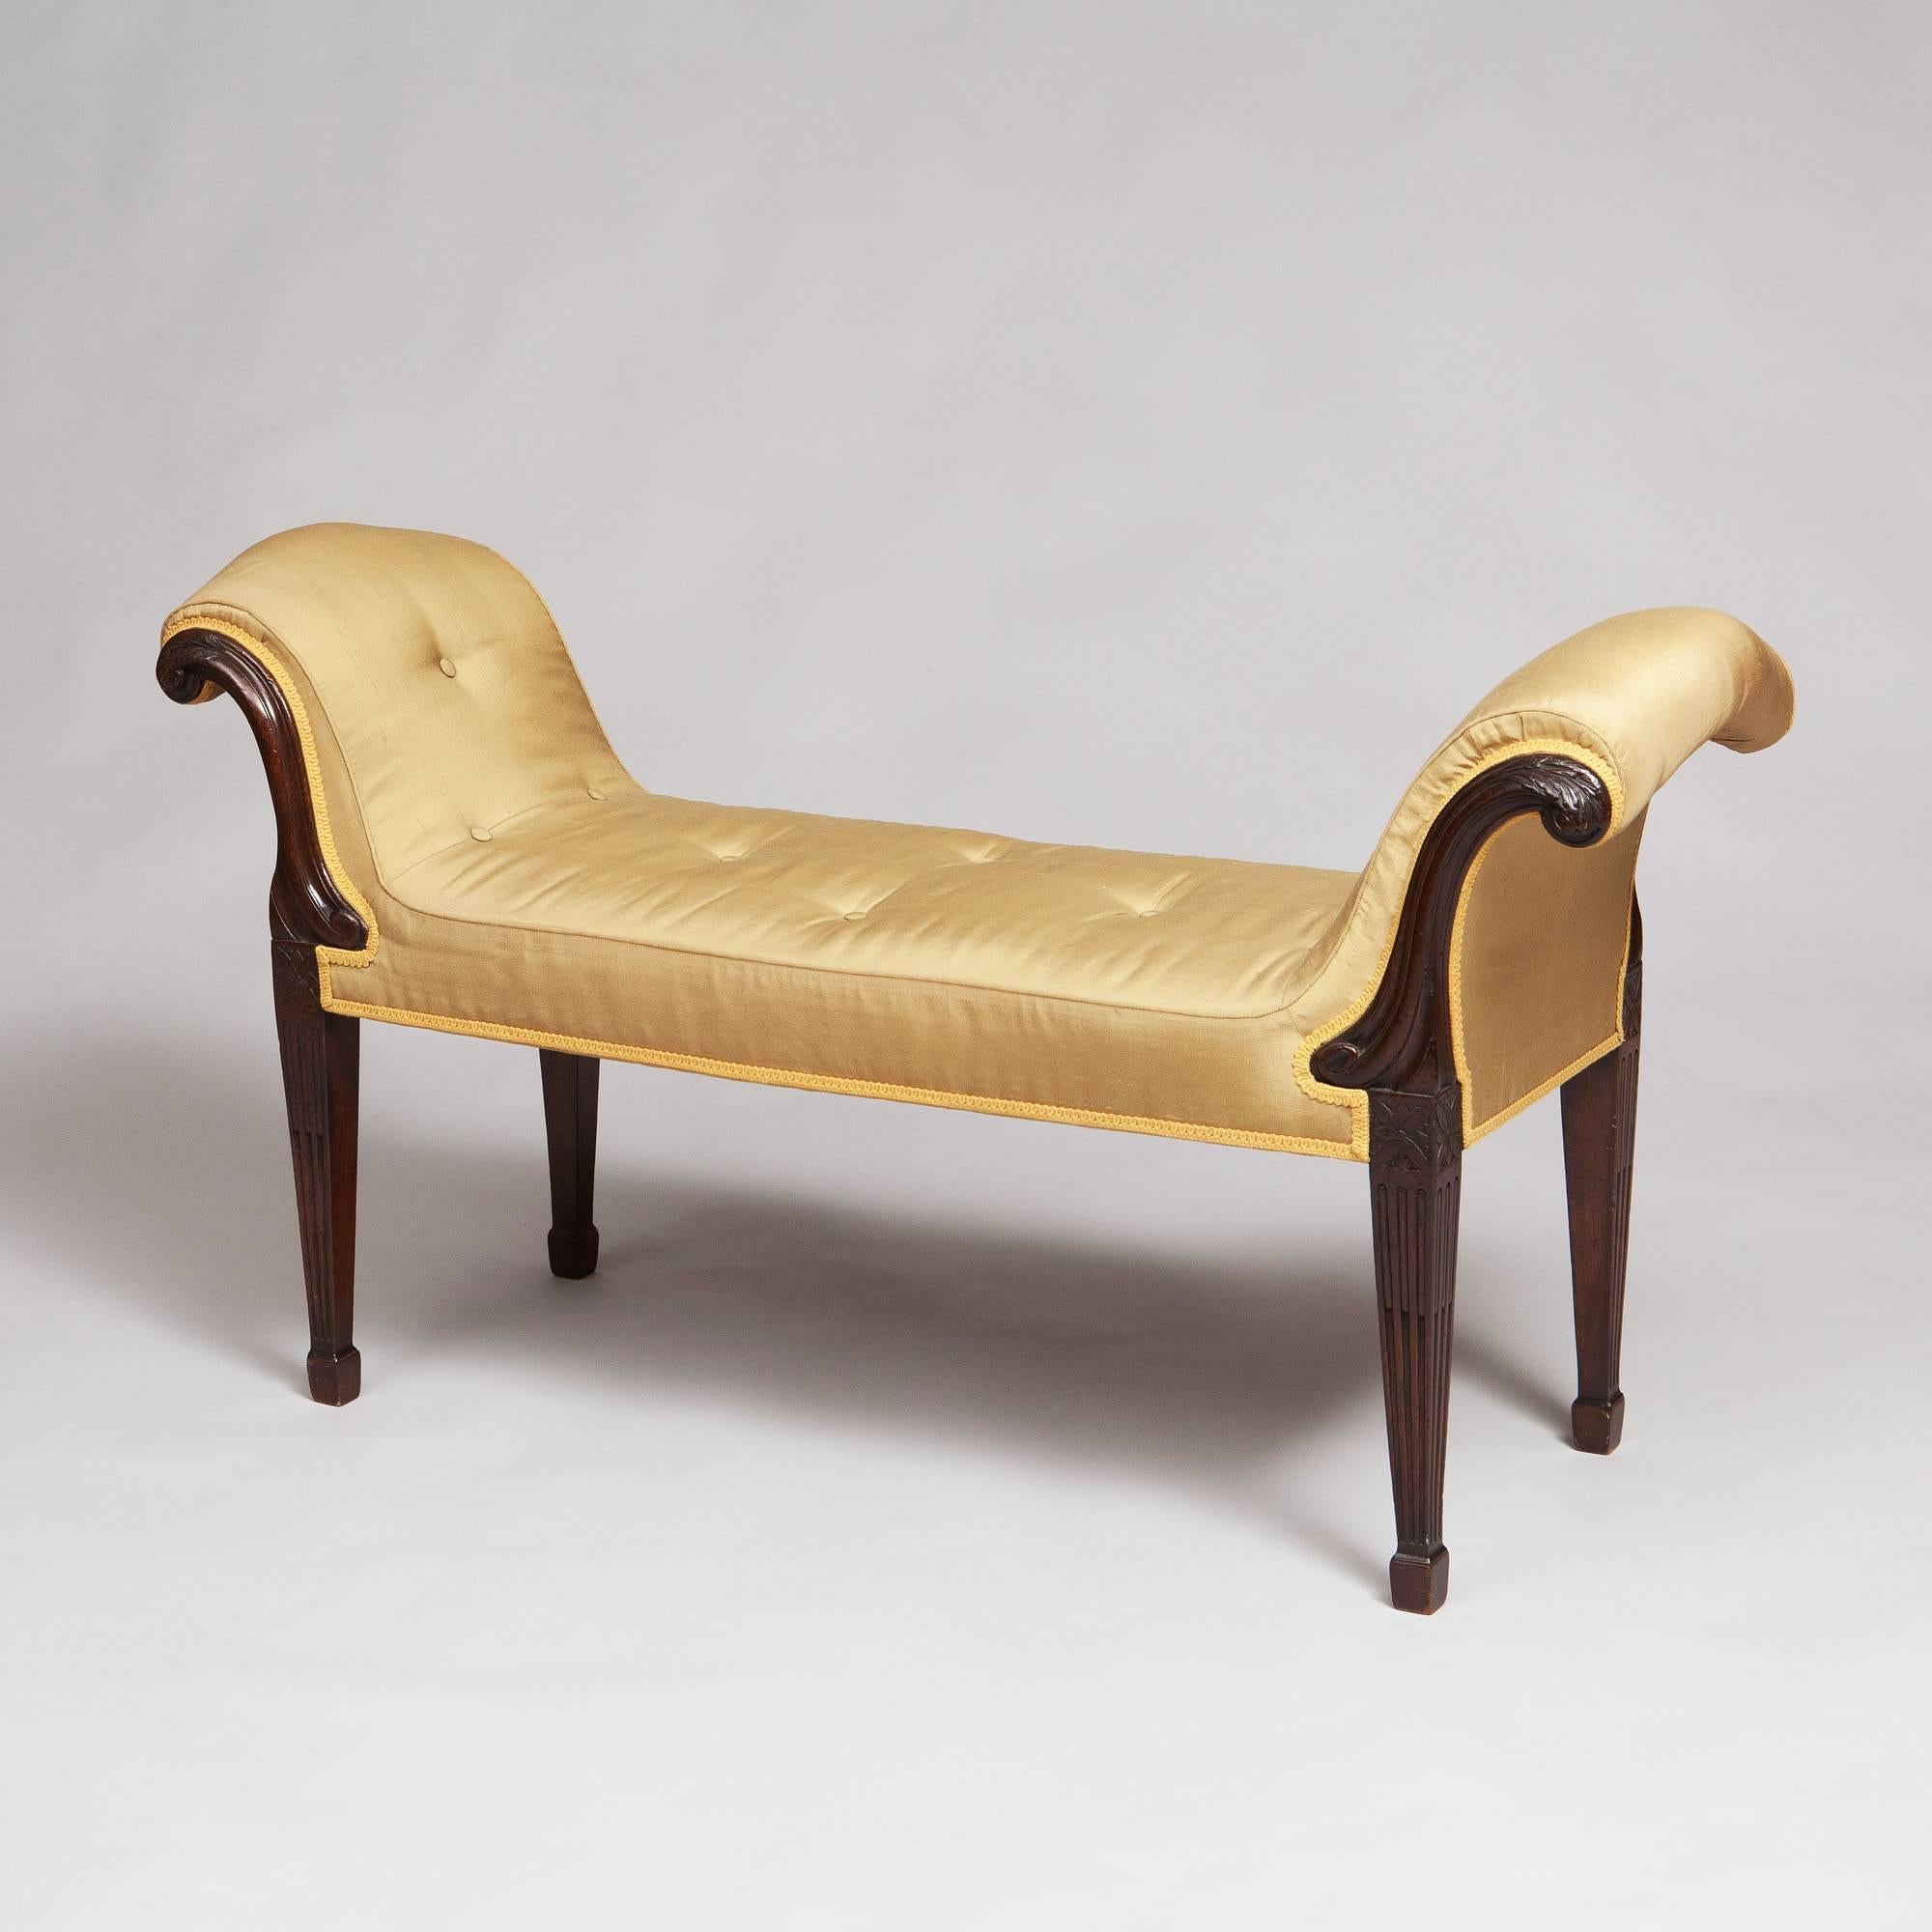 England, circa 1770.
​
The acanthus-carved scroll ends above a straight seat rail on stop fluted tapering legs headed by paterae.

Measures: Width 48in,
height 25in,
seat height 16in.
​Depth 15 3/4in.